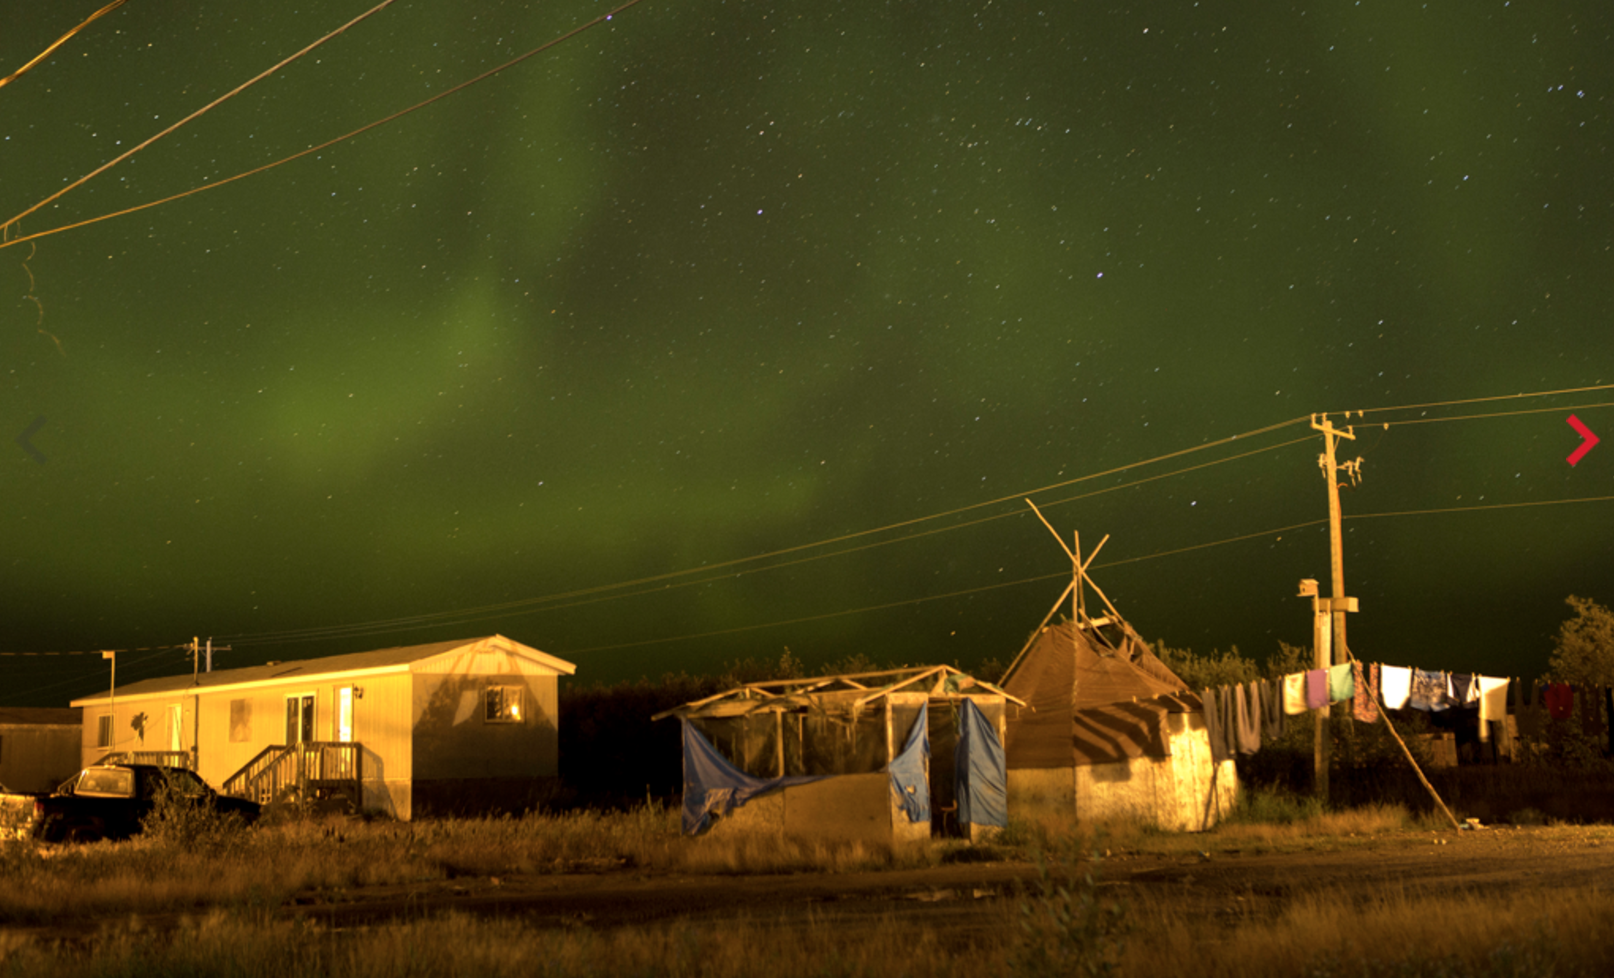 The northern lights fill the sky over the remote First Nations community of Attawapiskat. Attawapiskat is an isolated First Nation community located in northern Ontario, Canada, at the mouth of the Attawapiskat River on James Bay. On April 9, 2016, the community of approximately 2000 people declared a state of emergency after being overwhelmed with attempted suicides, over 100 attempts in a ten month period. Image by David Maurice Smith/Oculi. Canada, 2016.